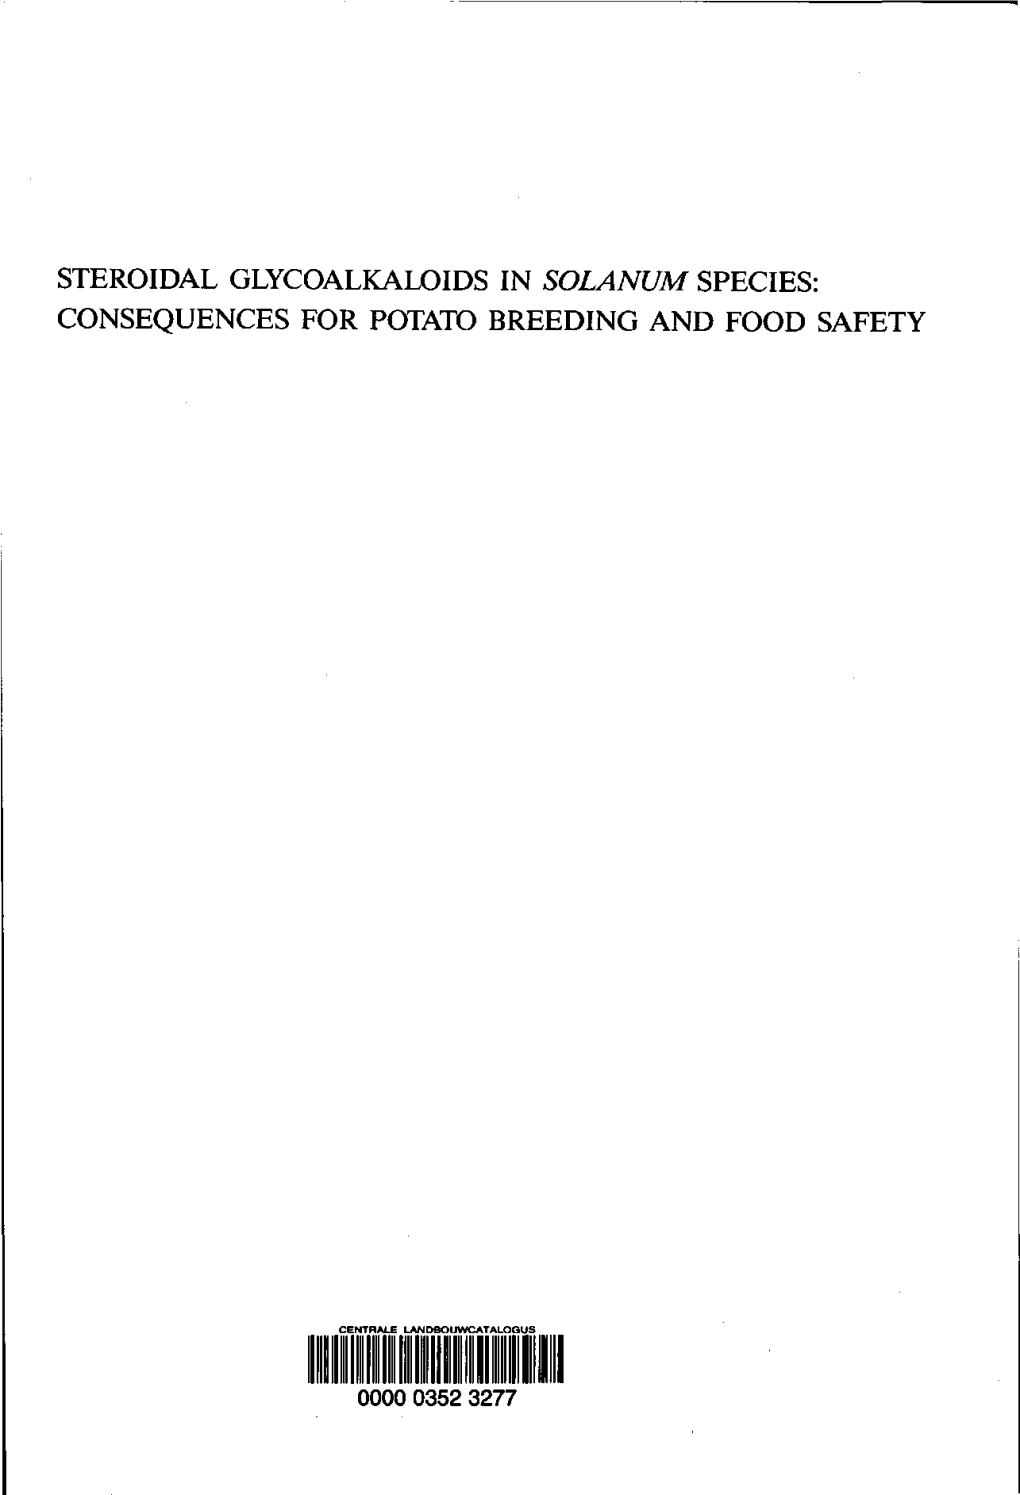 Steroidal Glycoalkaloids in Solanum Species: Consequences for Potato Breeding and Food Safety